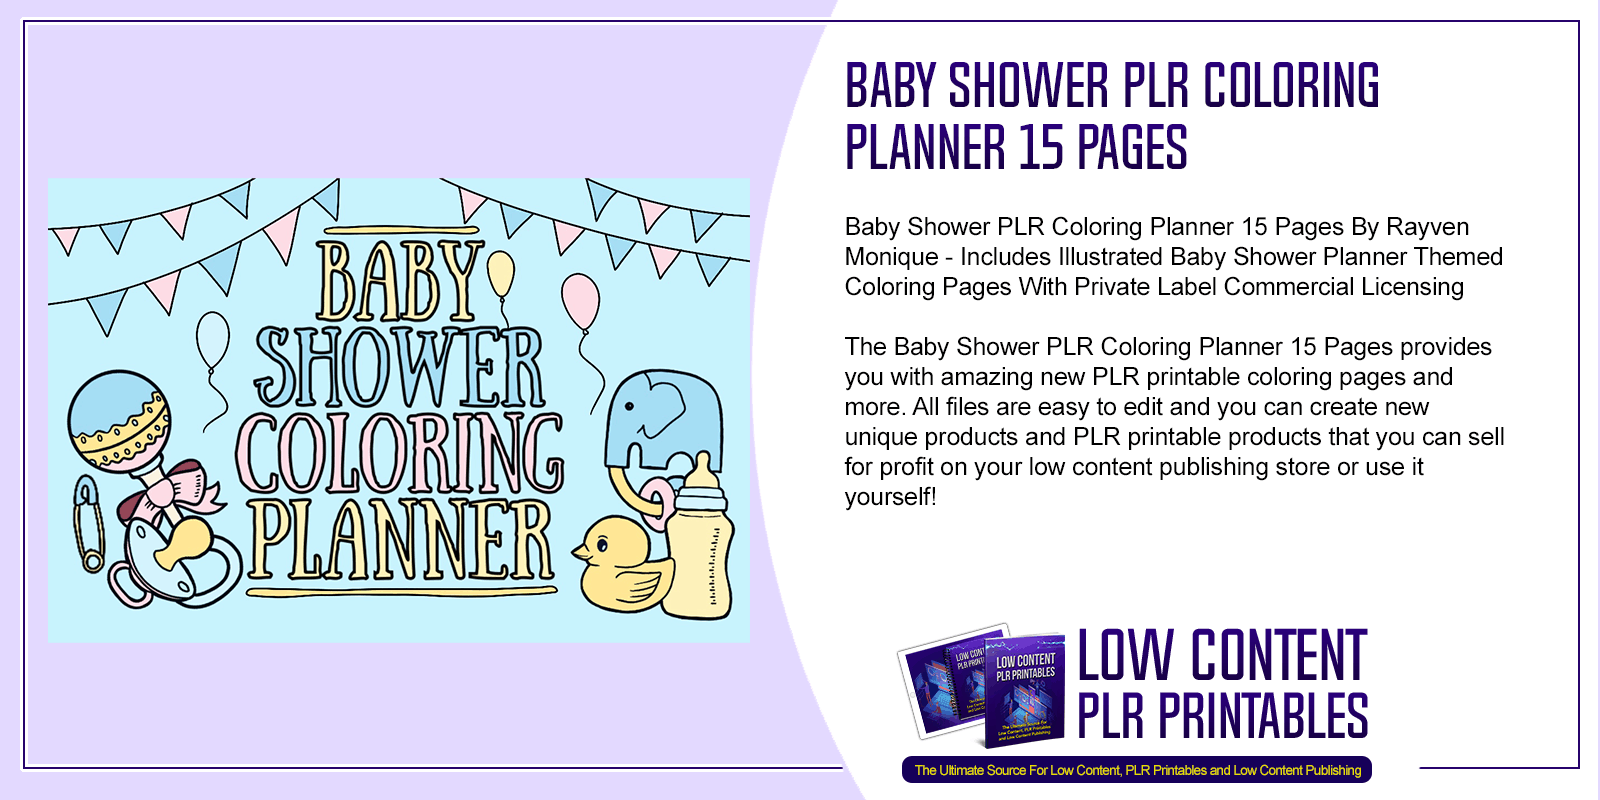 Baby Shower PLR Coloring Planner 15 Pages